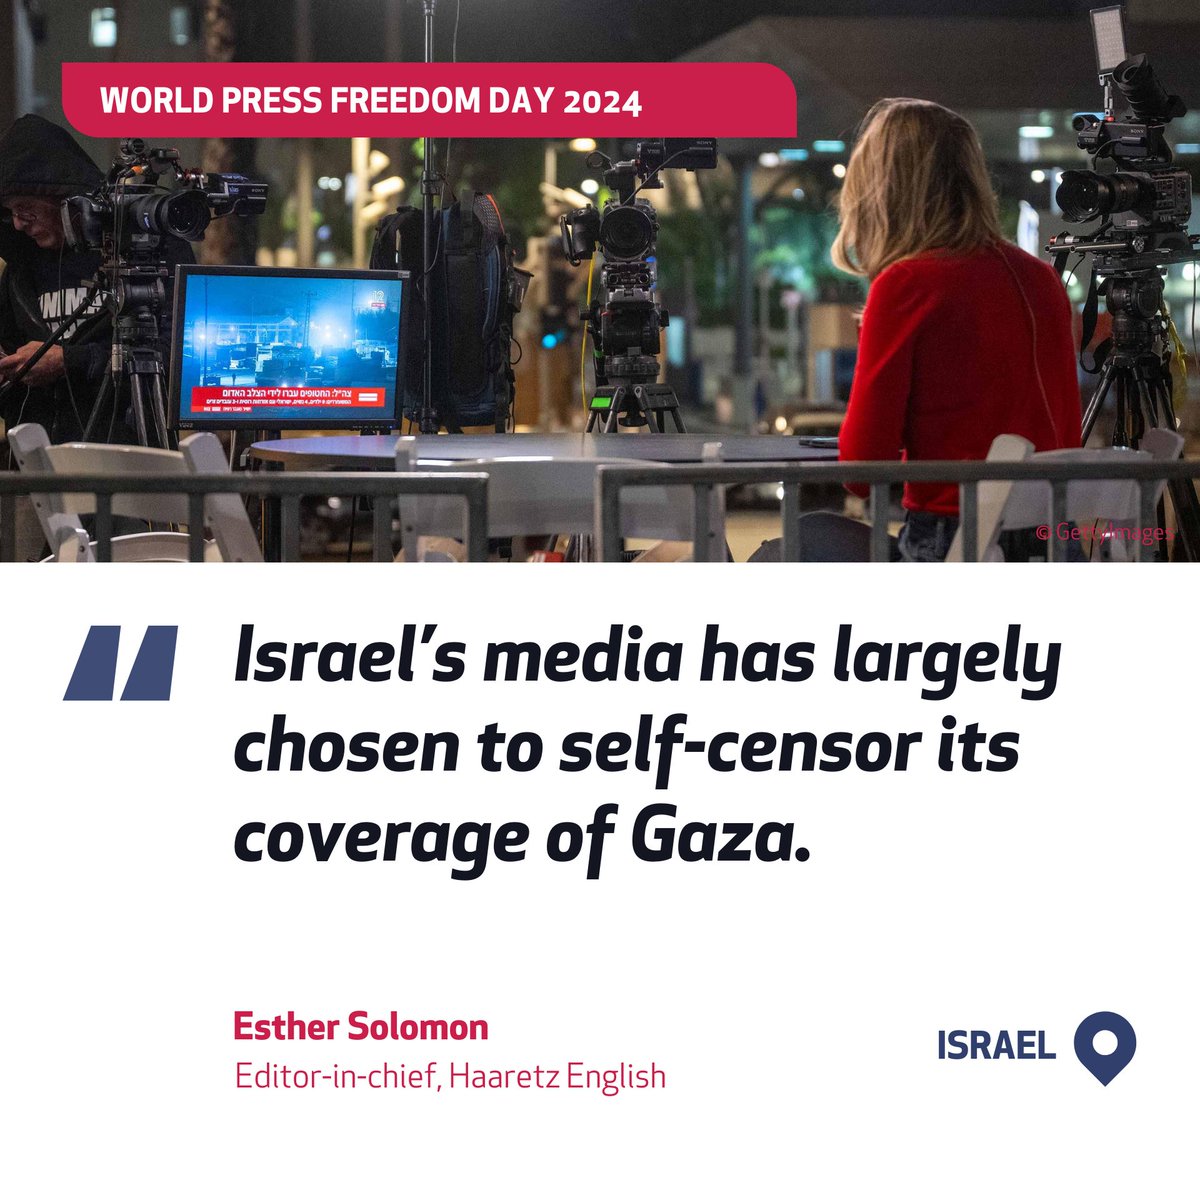 As we mark #WorldPressFreedomDay, @haaretzcom editor-in-chief @EstherSolomon discusses Israel's weakened press freedom and the national ‘cognitive gap’. Read here: iwpr.net/global-voices/…